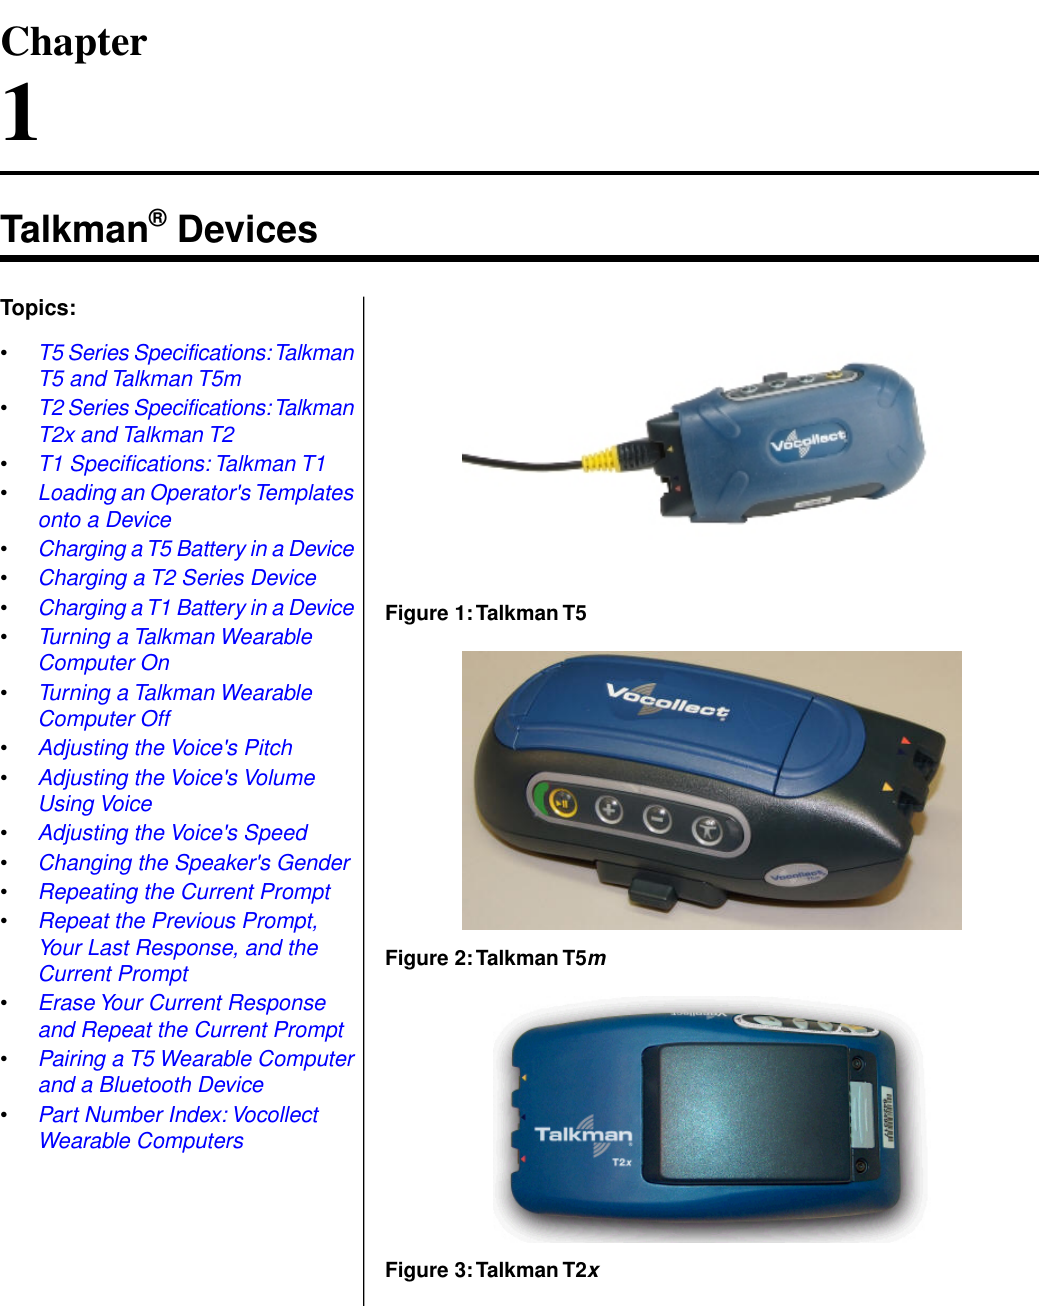 Chapter1Talkman® DevicesFigure 1:Talkman T5Topics:•T5 Series Specifications:TalkmanT5 and Talkman T5m•T2 Series Specifications:TalkmanT2x and Talkman T2•T1 Specifications: Talkman T1•Loading an Operator&apos;s Templatesonto a Device•Charging a T5 Battery in a Device•Charging a T2 Series Device•Charging a T1 Battery in a Device•Turning a Talkman WearableComputer OnFigure 2:Talkman T5m•Turning a Talkman WearableComputer Off•Adjusting the Voice&apos;s Pitch•Adjusting the Voice&apos;s VolumeUsing Voice•Adjusting the Voice&apos;s Speed•Changing the Speaker&apos;s Gender•Repeating the Current Prompt•Repeat the Previous Prompt,Your Last Response, and theCurrent Prompt•Erase Your Current Responseand Repeat the Current PromptFigure 3:Talkman T2x•Pairing a T5 Wearable Computerand a Bluetooth Device•Part Number Index: VocollectWearable Computers